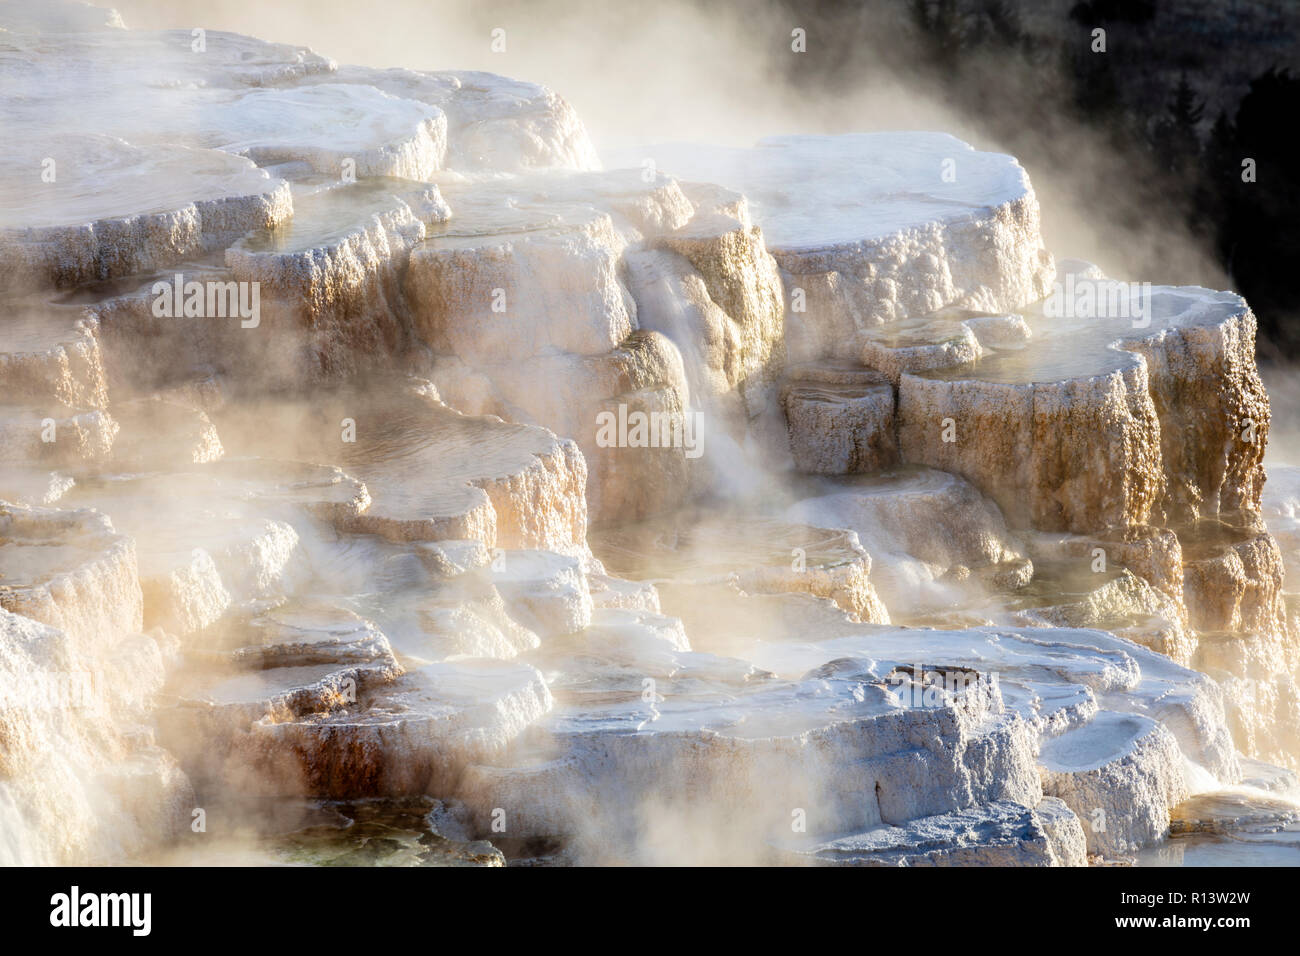 WY03560-00...WYOMING - Upper Terraces of Mammoth Hot Springs in Yellowstone National Park. Stock Photo